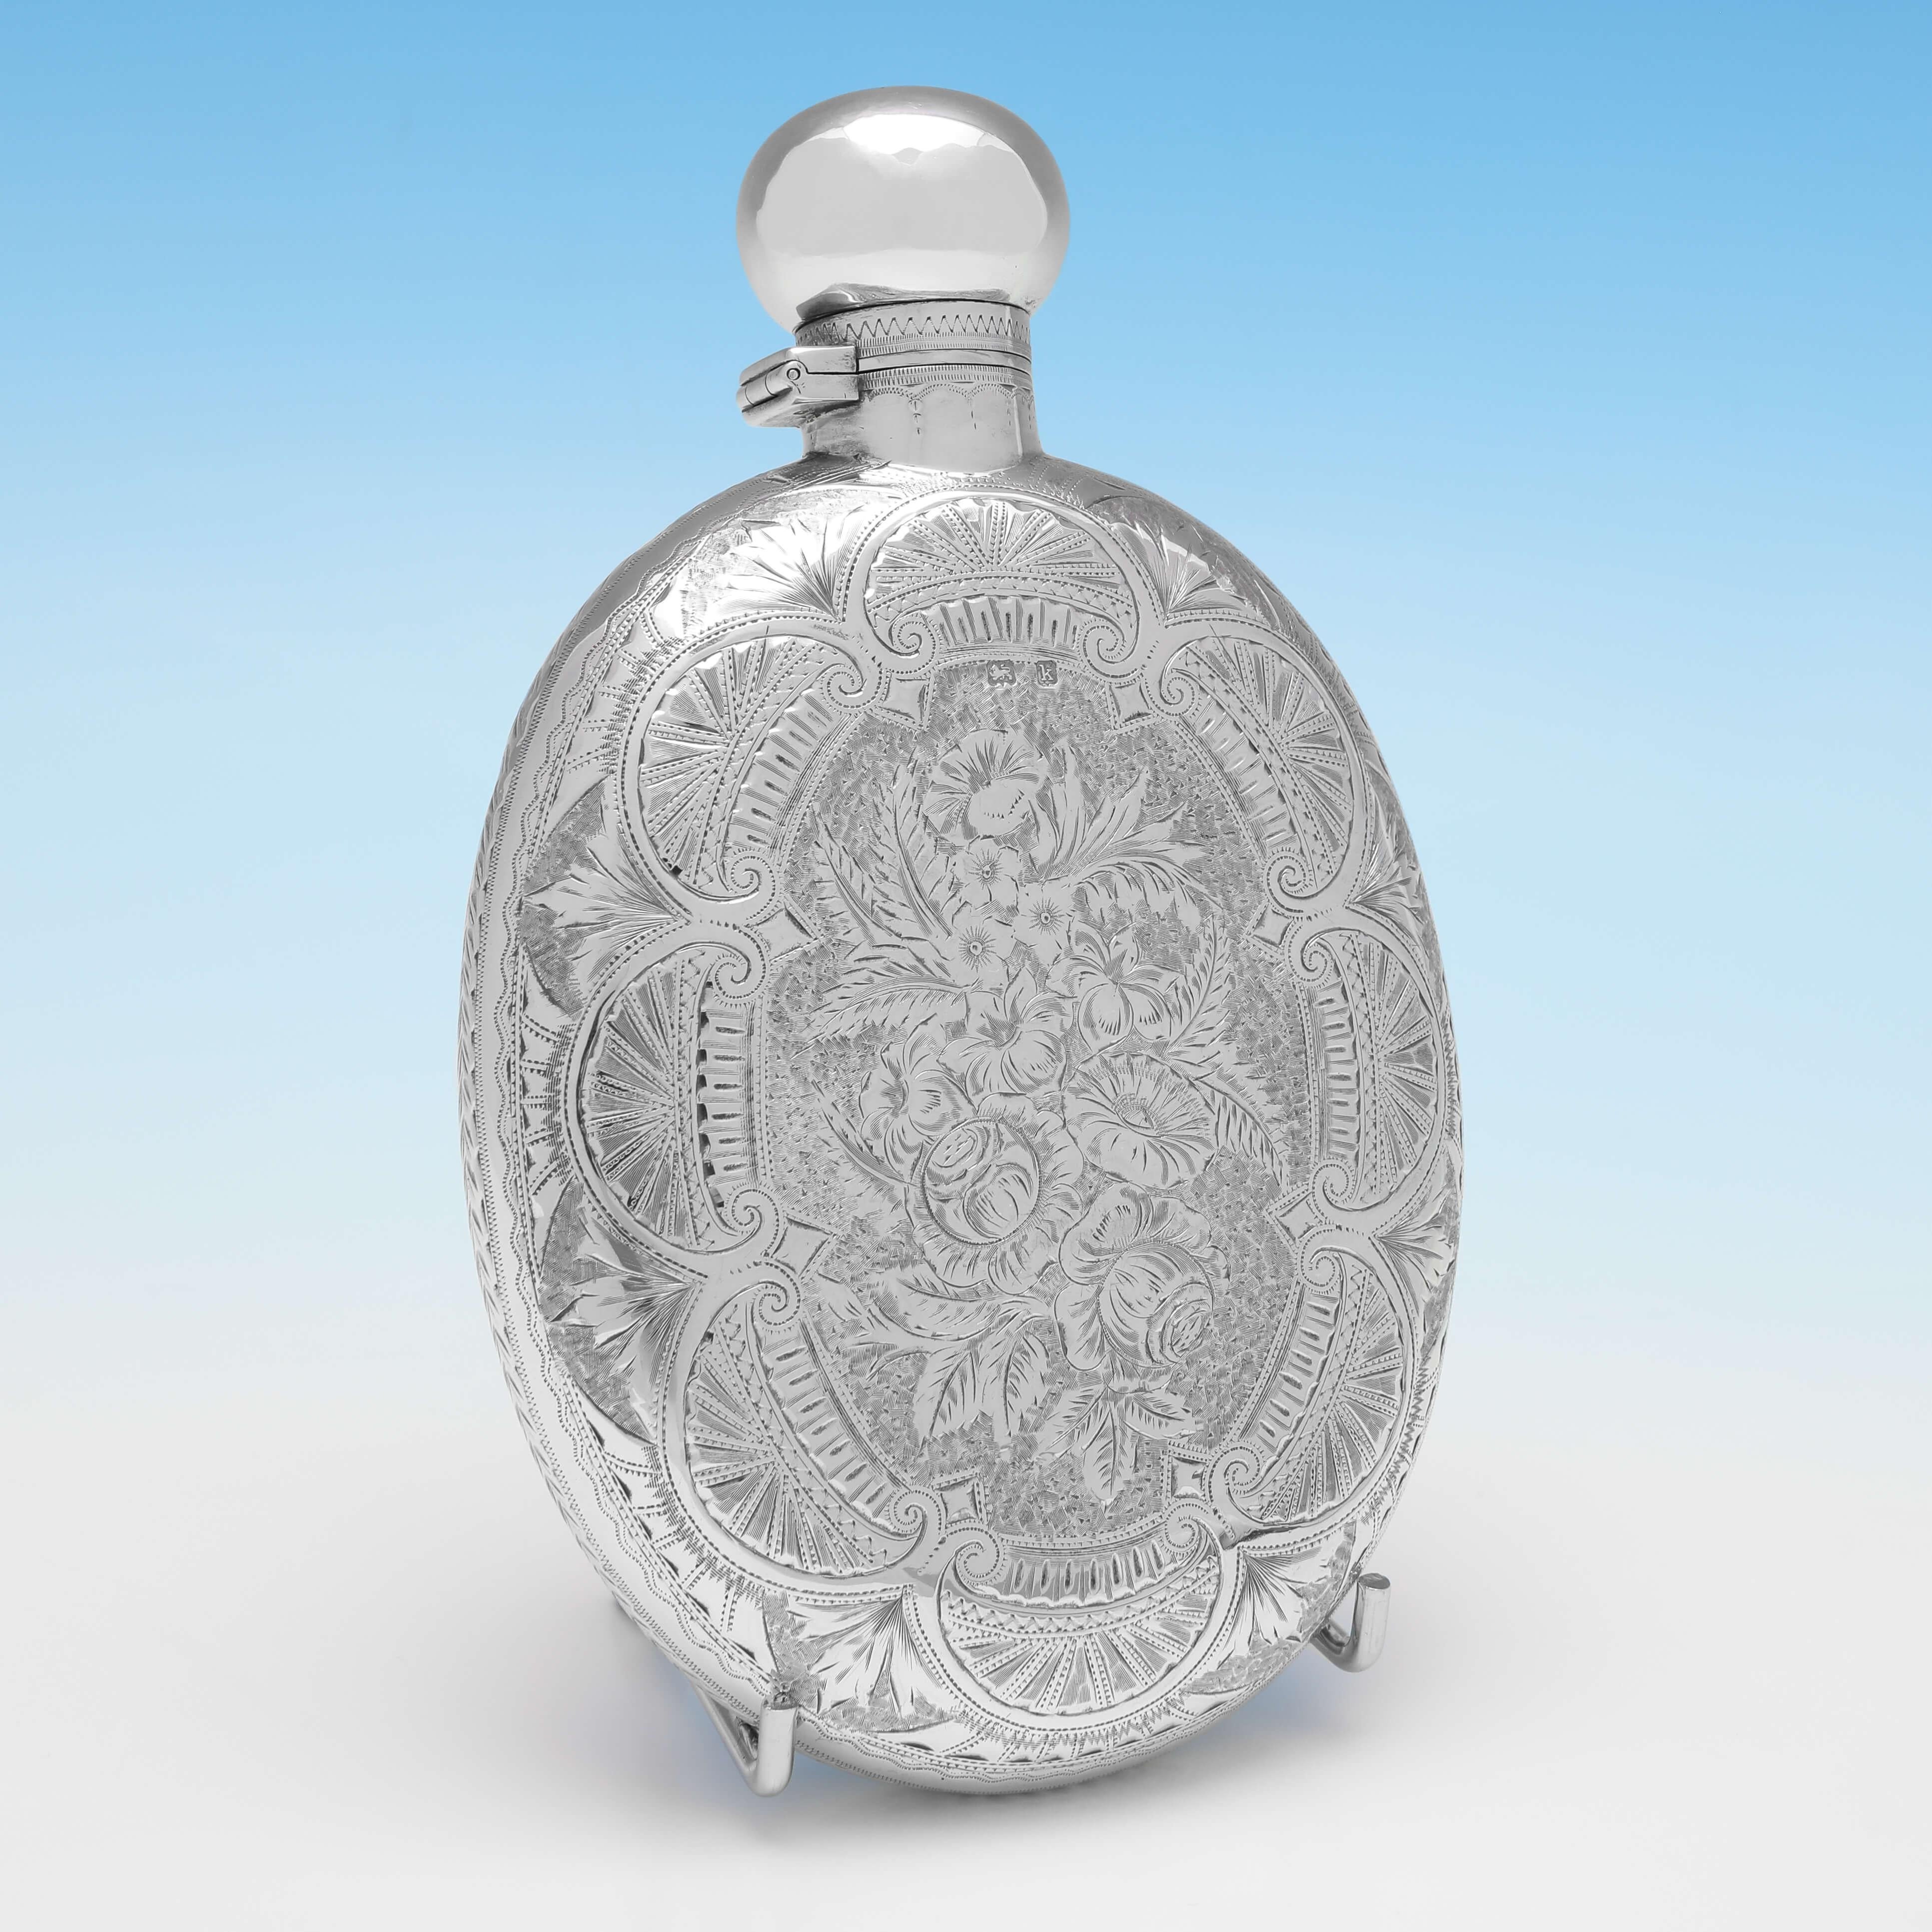 Hallmarked in Birmingham in 1909 by Joseph Gloster Ltd., this stunning, Victorian, Antique Sterling Silver Hip Flask, is oval in shape, and features a bayonet cap and striking bright cut engraved decoration to the body. The hip flask measures